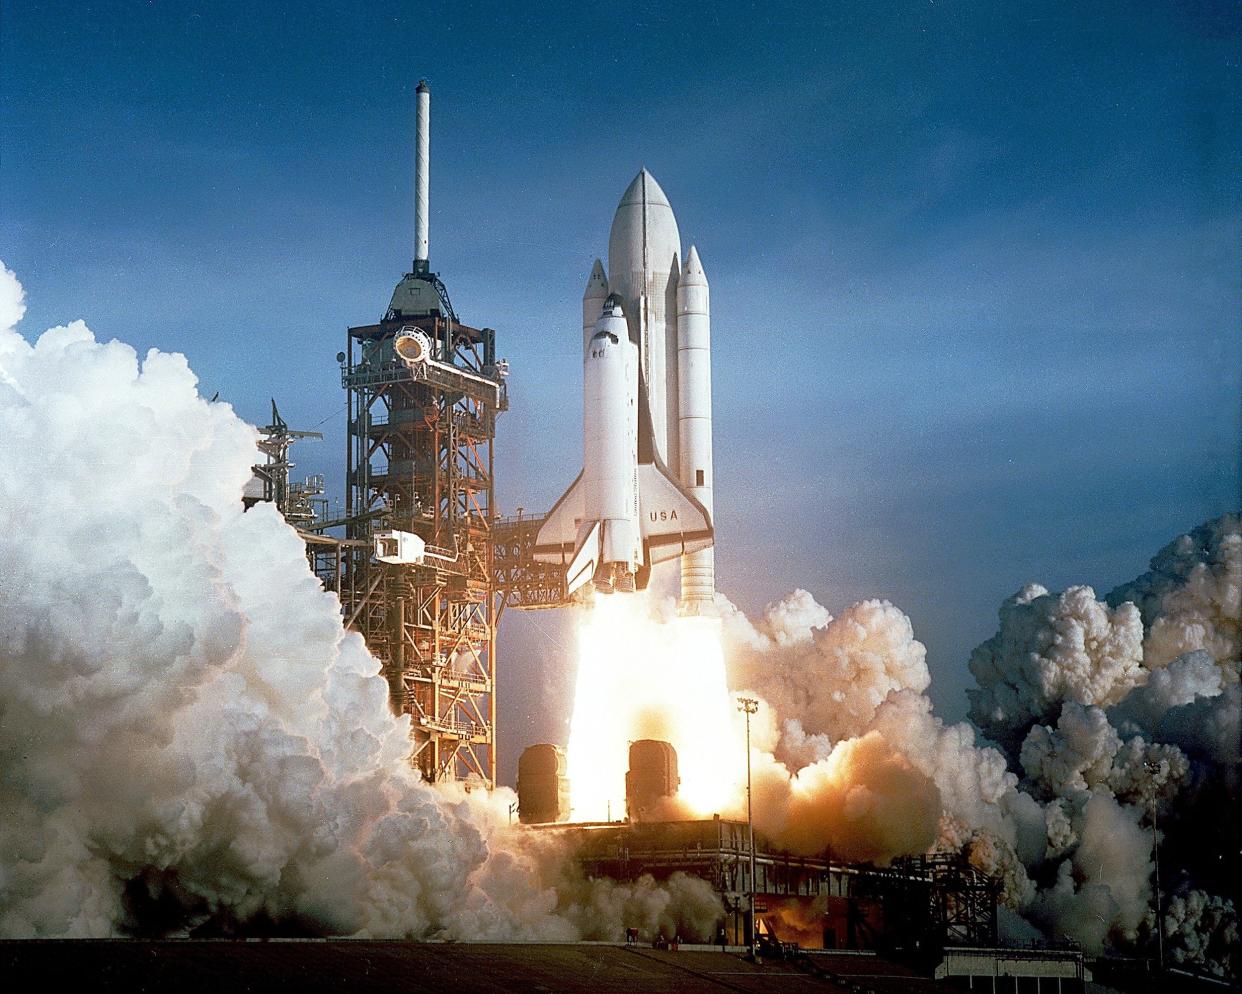 Space Shuttle Columbia maiden launch was on April 12, 1981